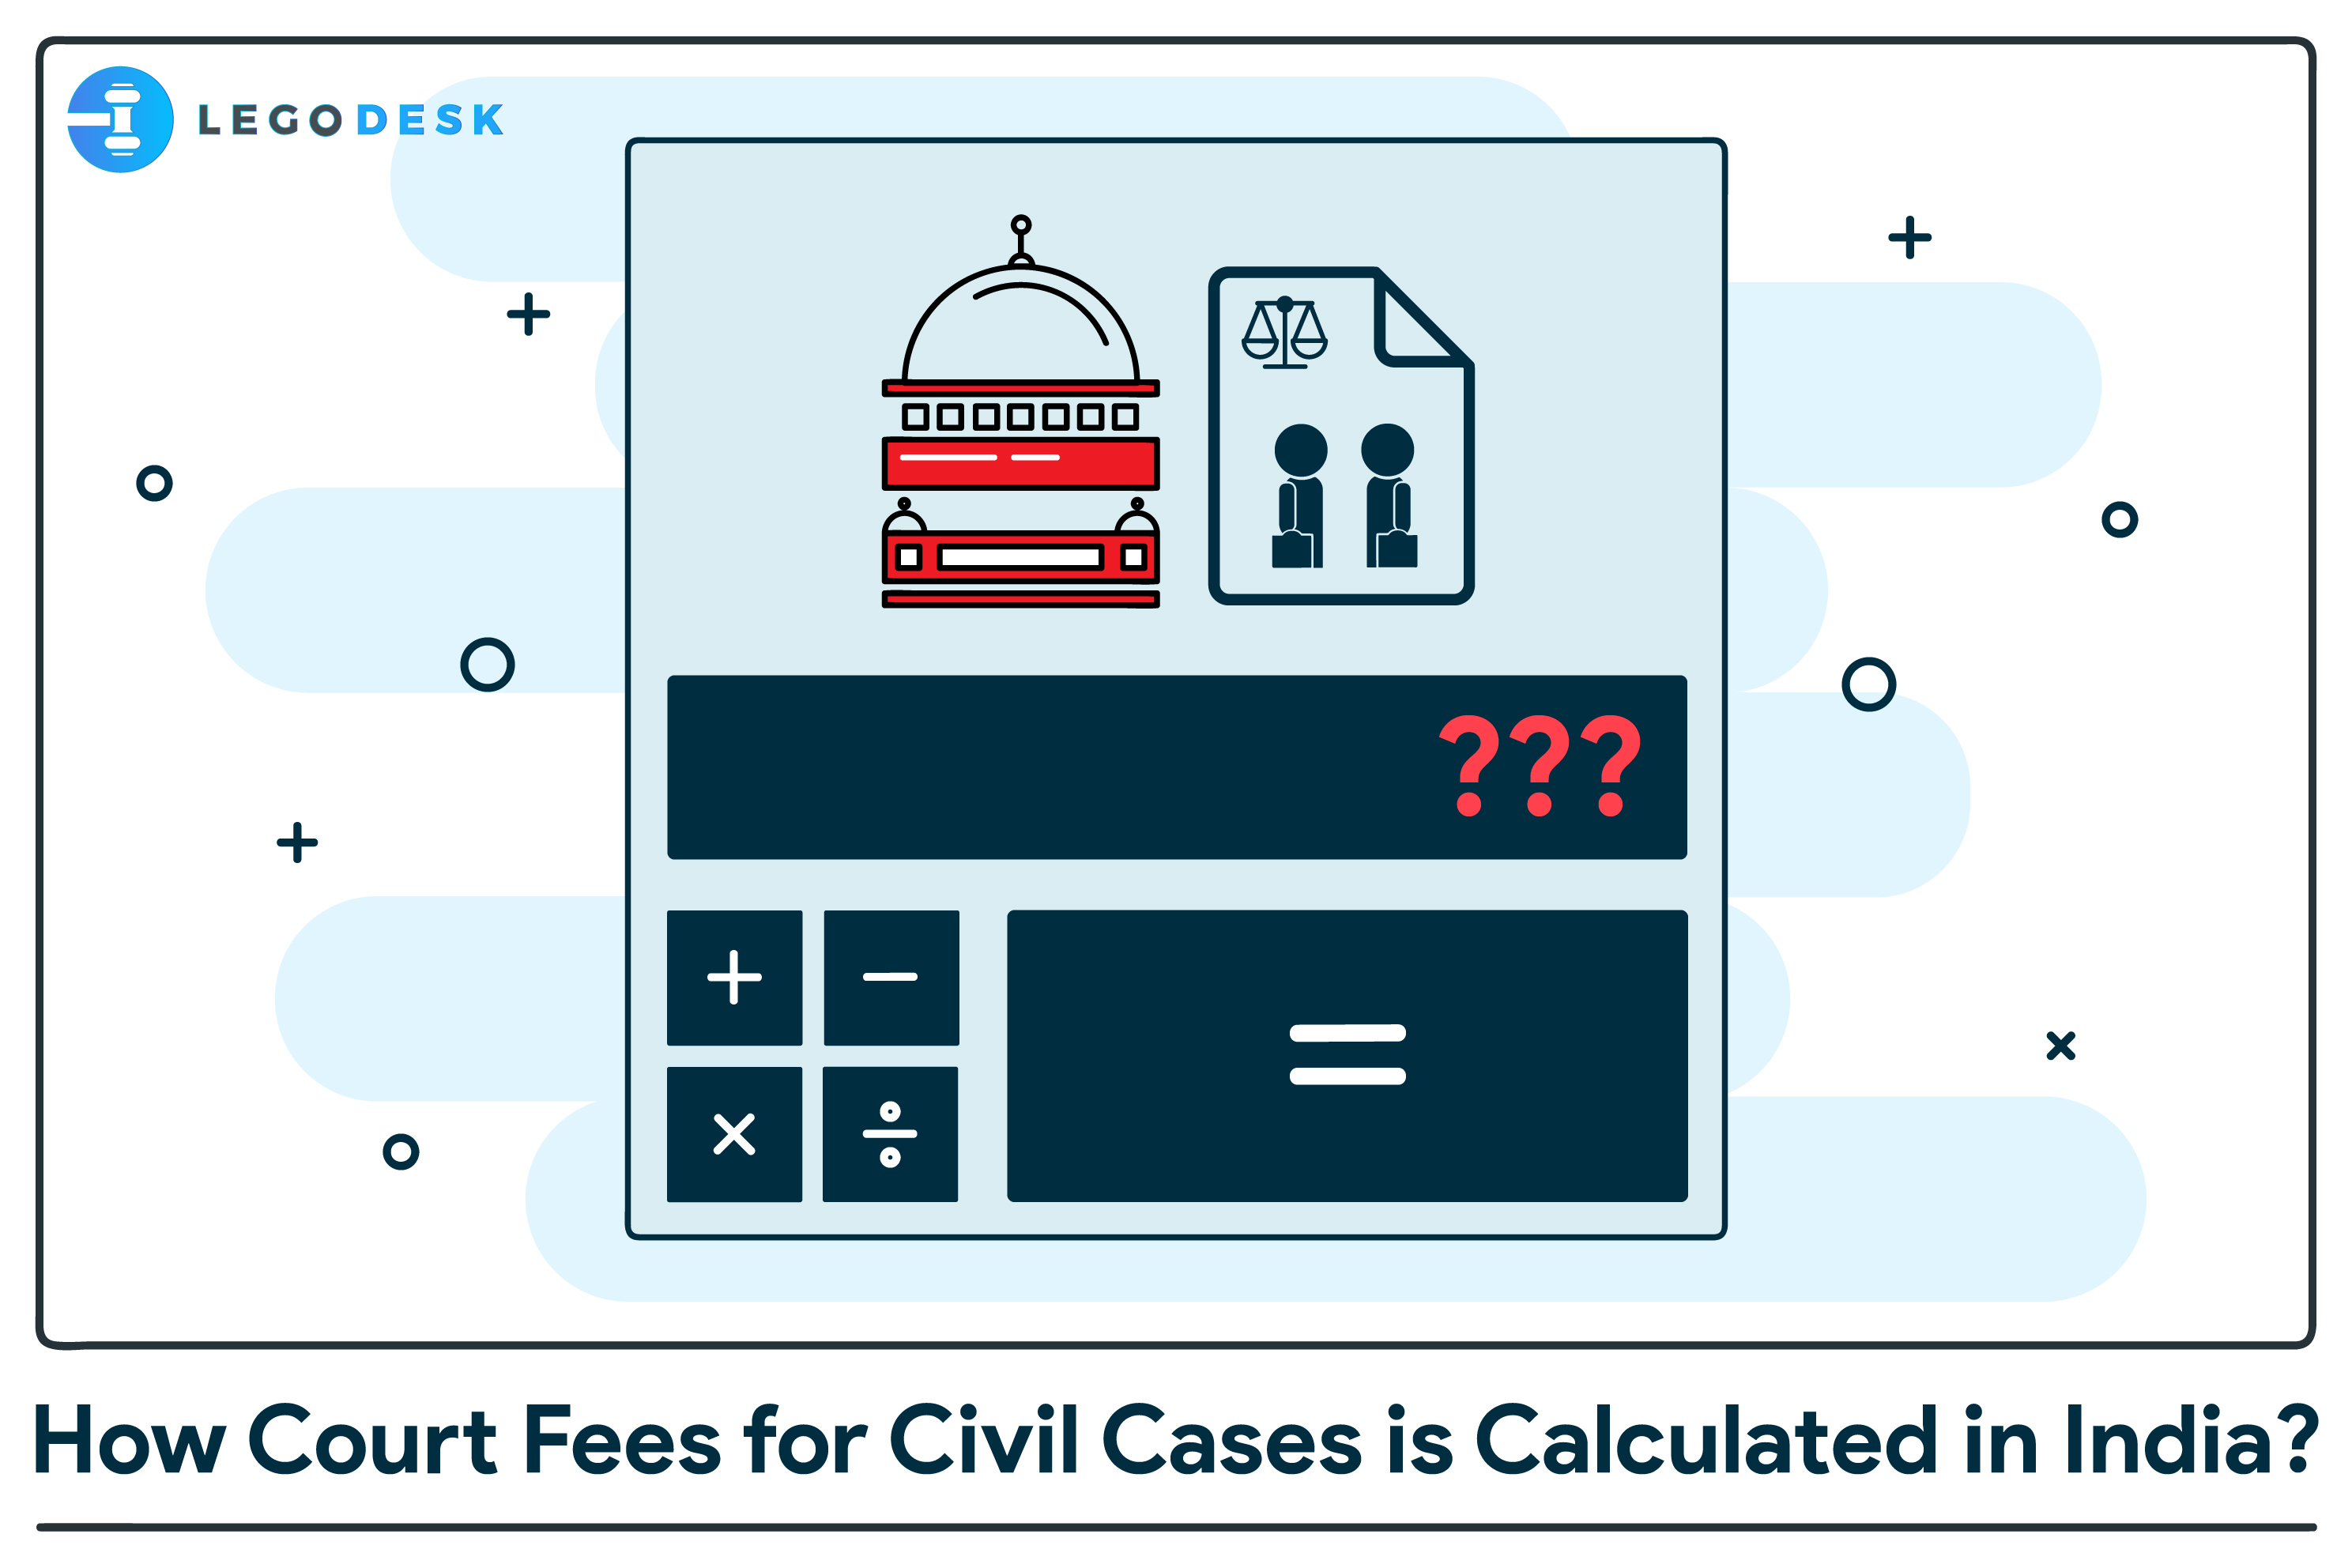 How court fees are calculated in India?